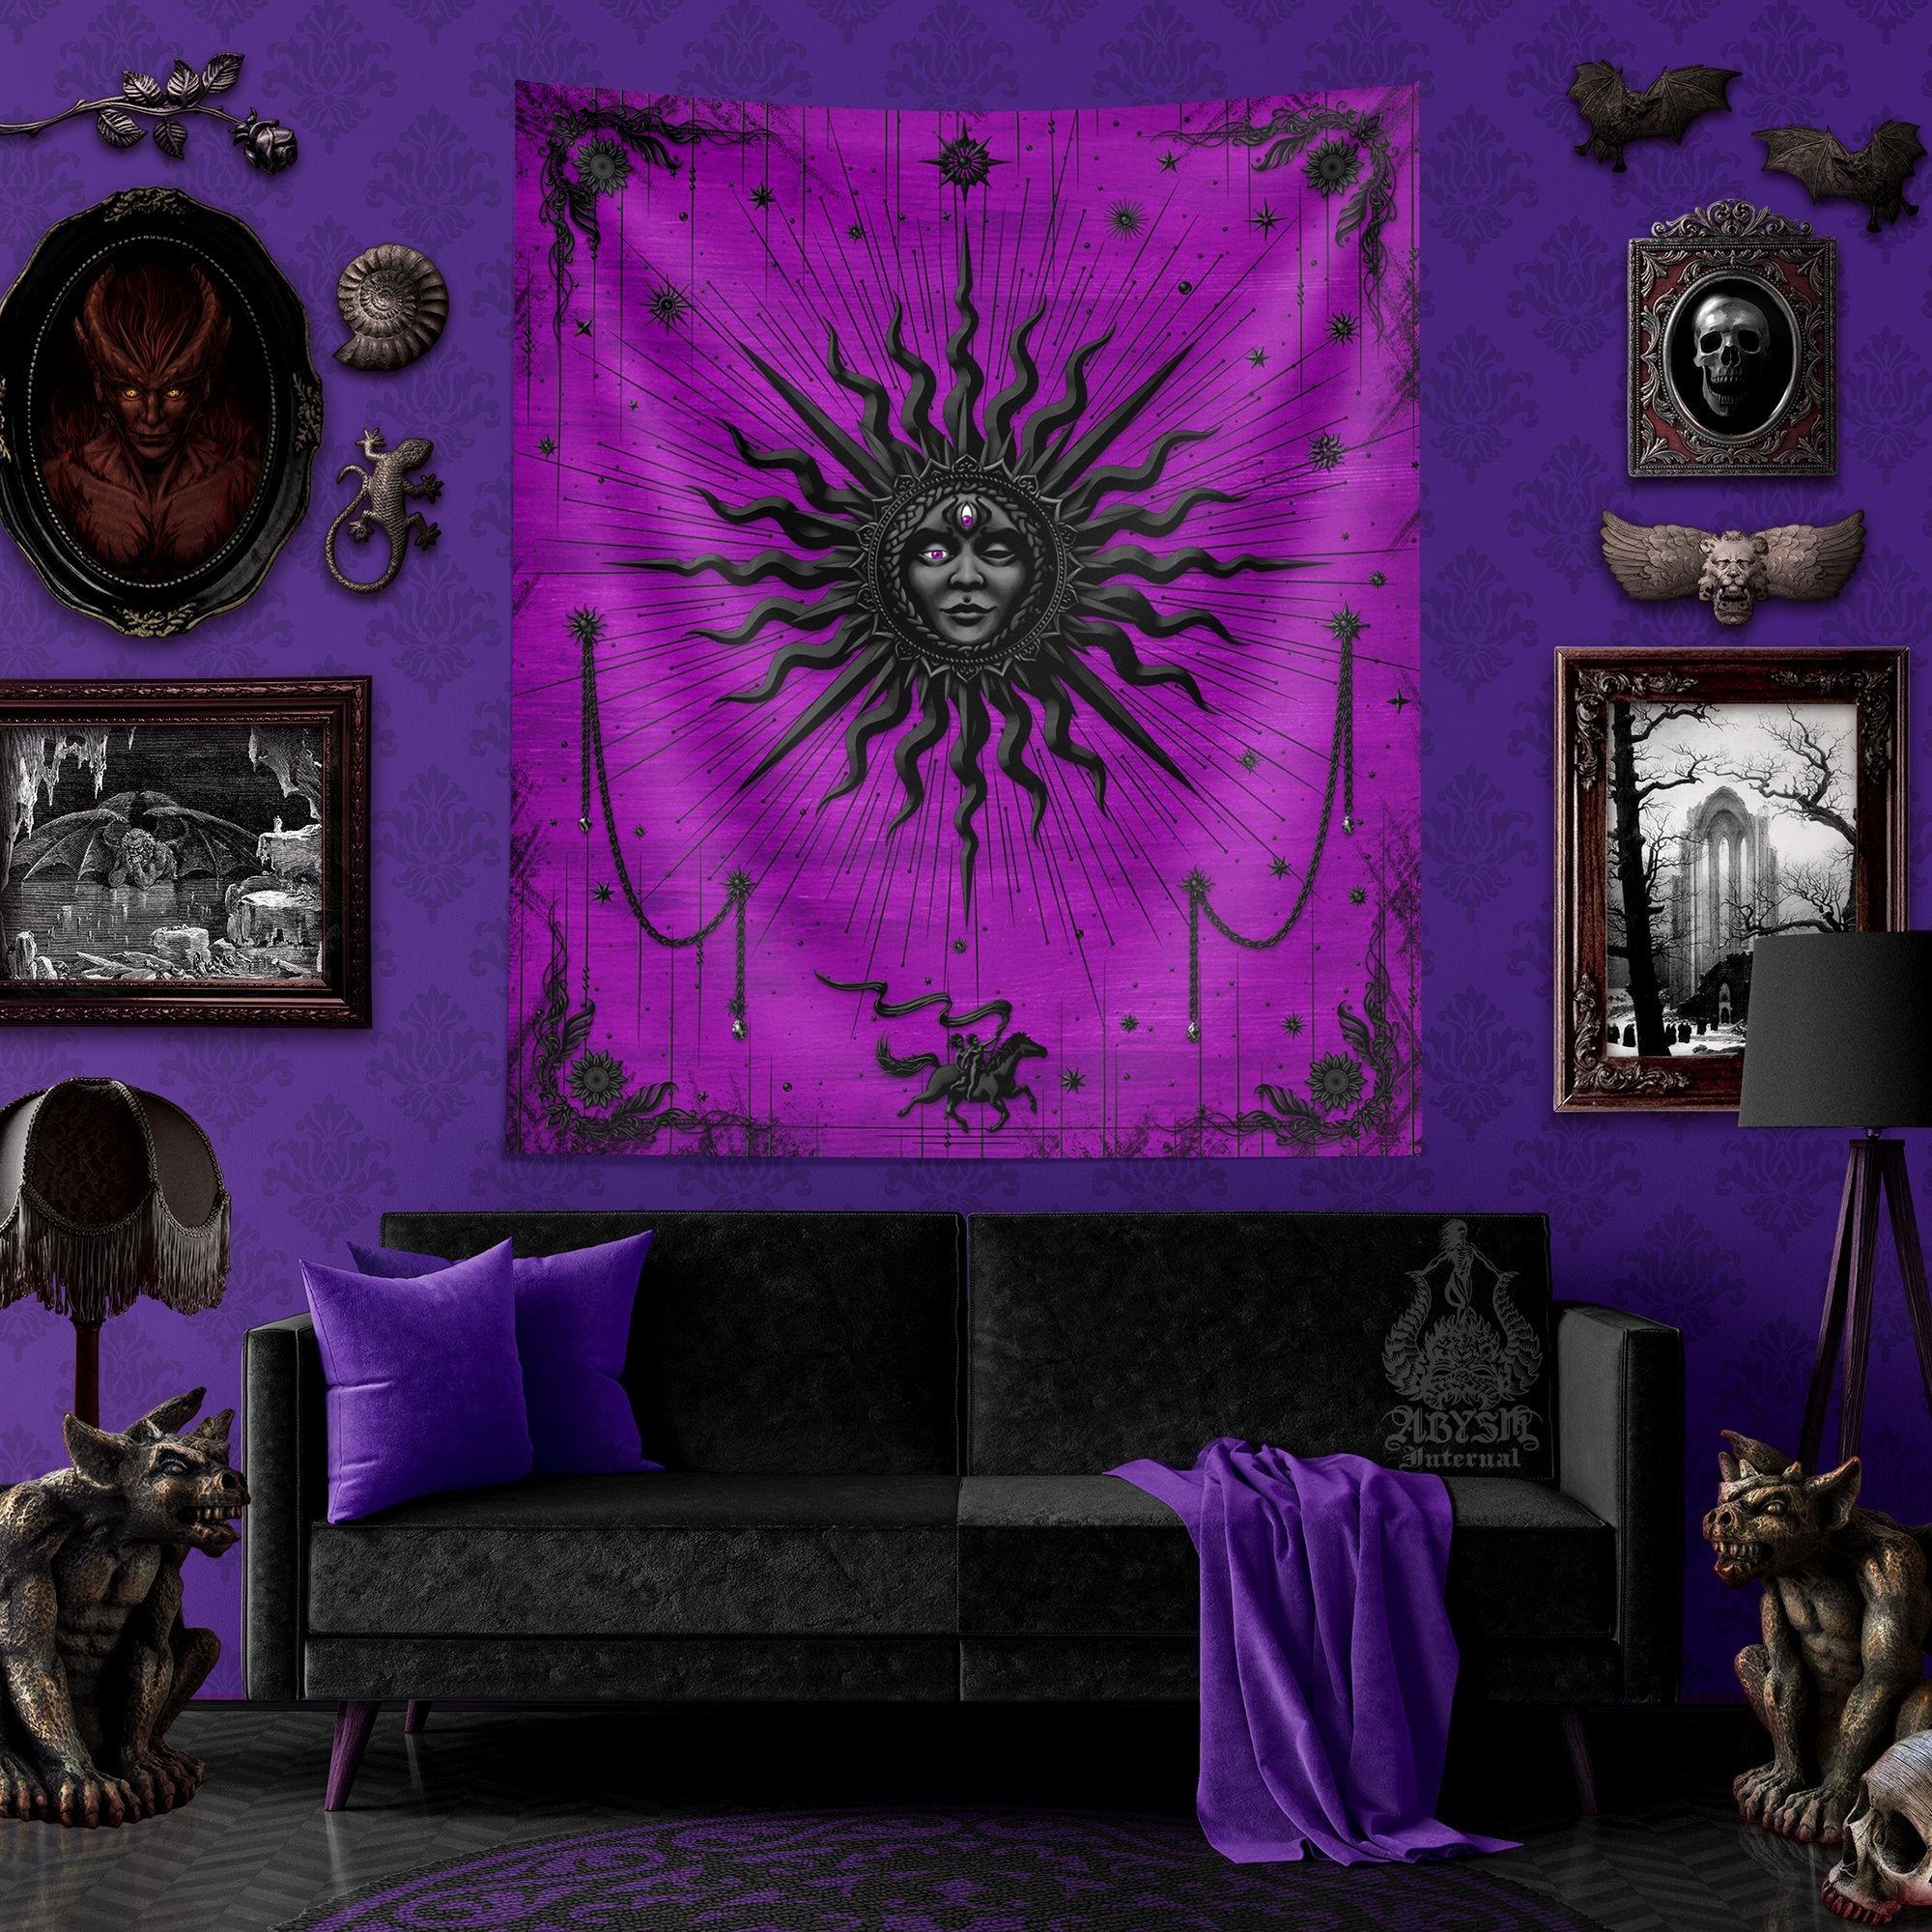 Witchy Sun Tapestry, Gothic Tarot Card Arcana Wall Hanging, Whimsical Witch's Room Decor, Pastel Goth Home, Magic and Esoteric Art, Vertical Print - Black Purple - Abysm Internal